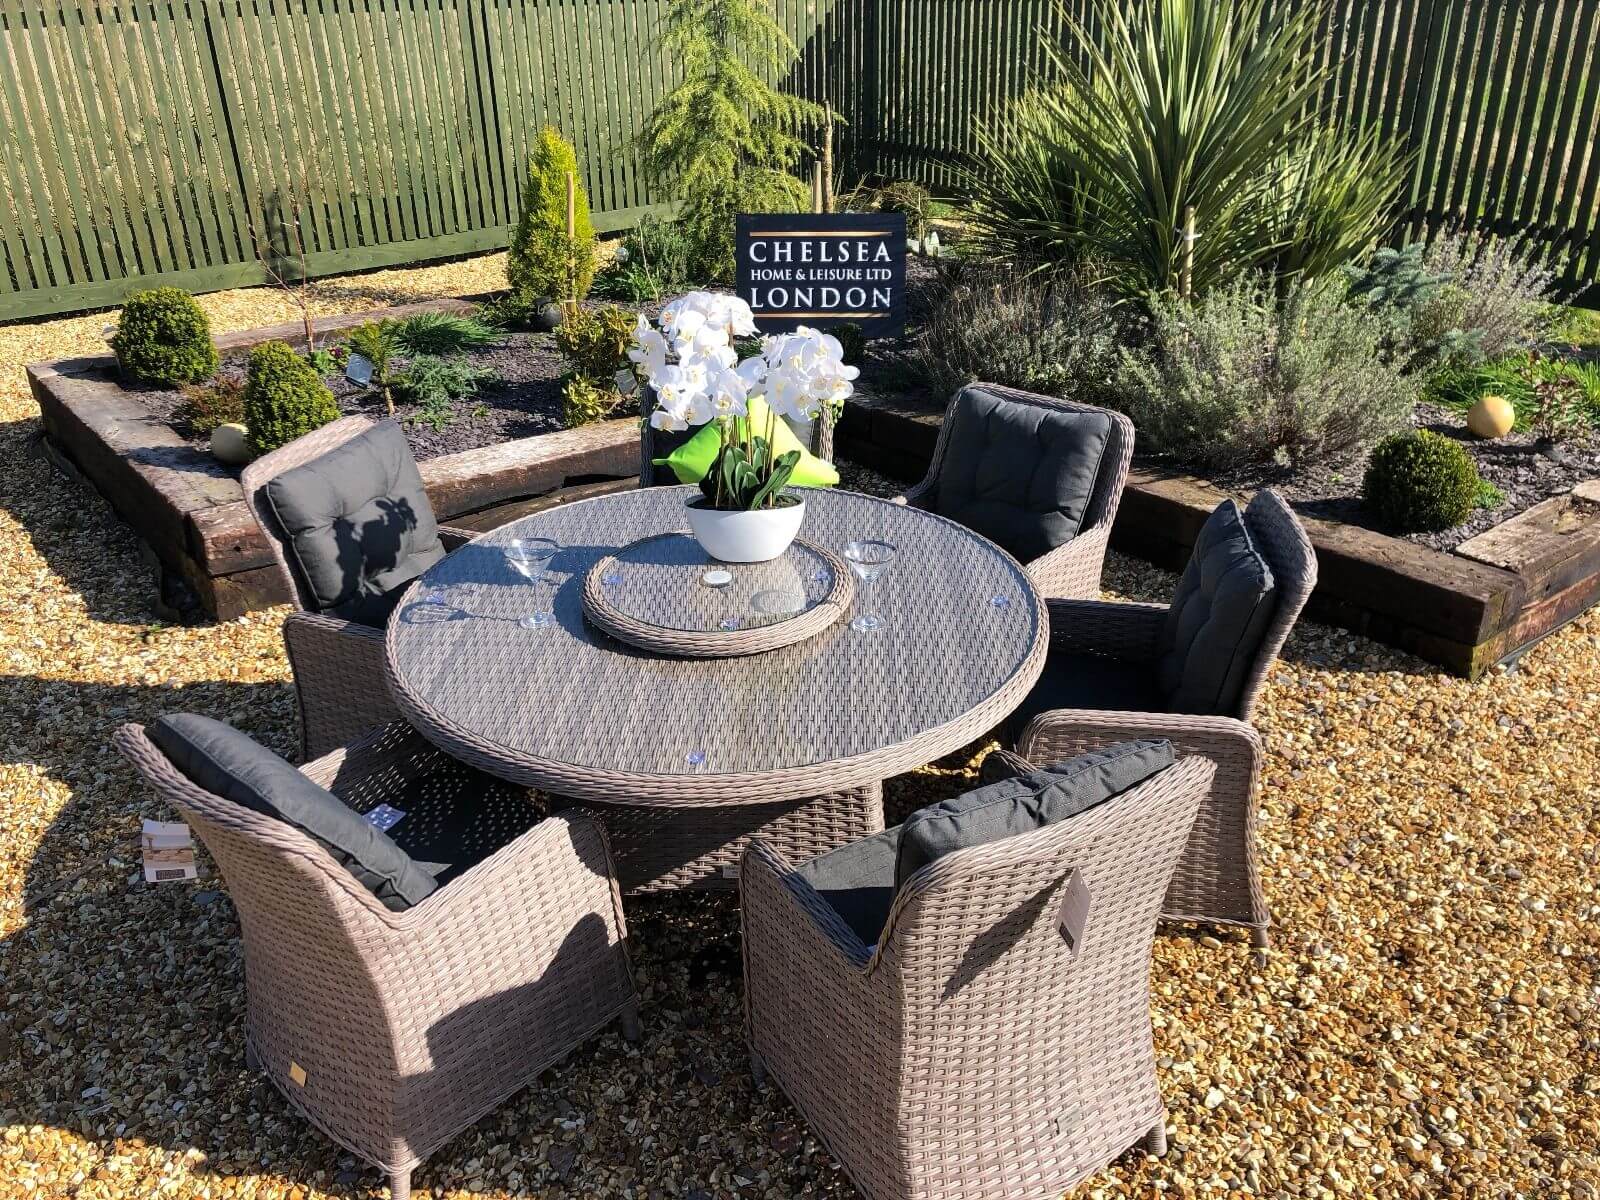 Premium Edition Round Rattan Dining Set With Reclining Chairs - Chelsea